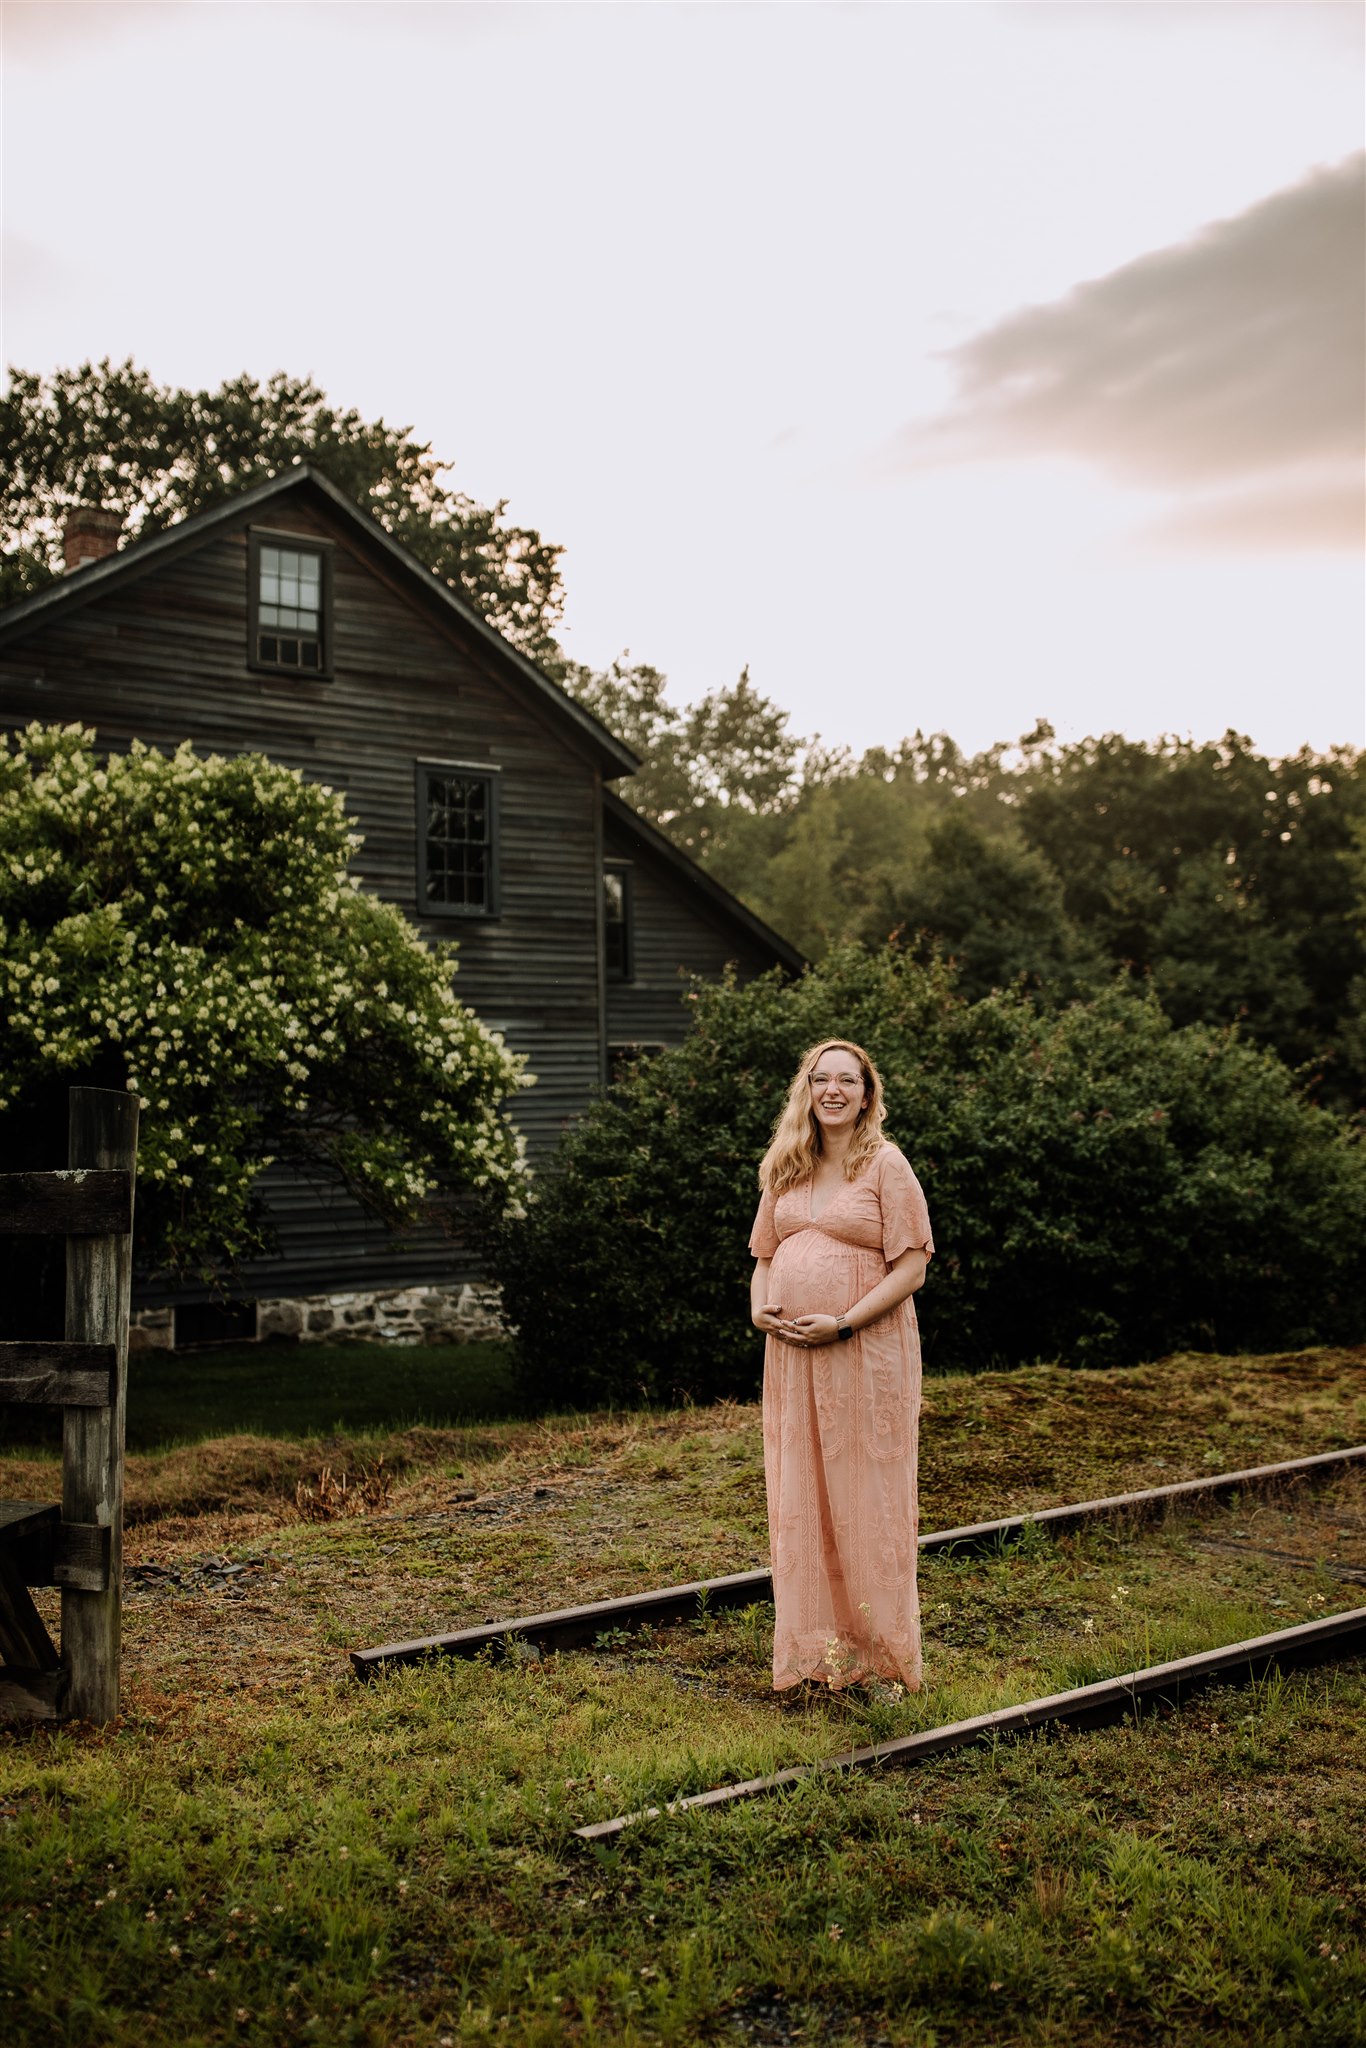 Pregnant woman in pink dress standing on movie set railroad tracks at Eckley Miners Village